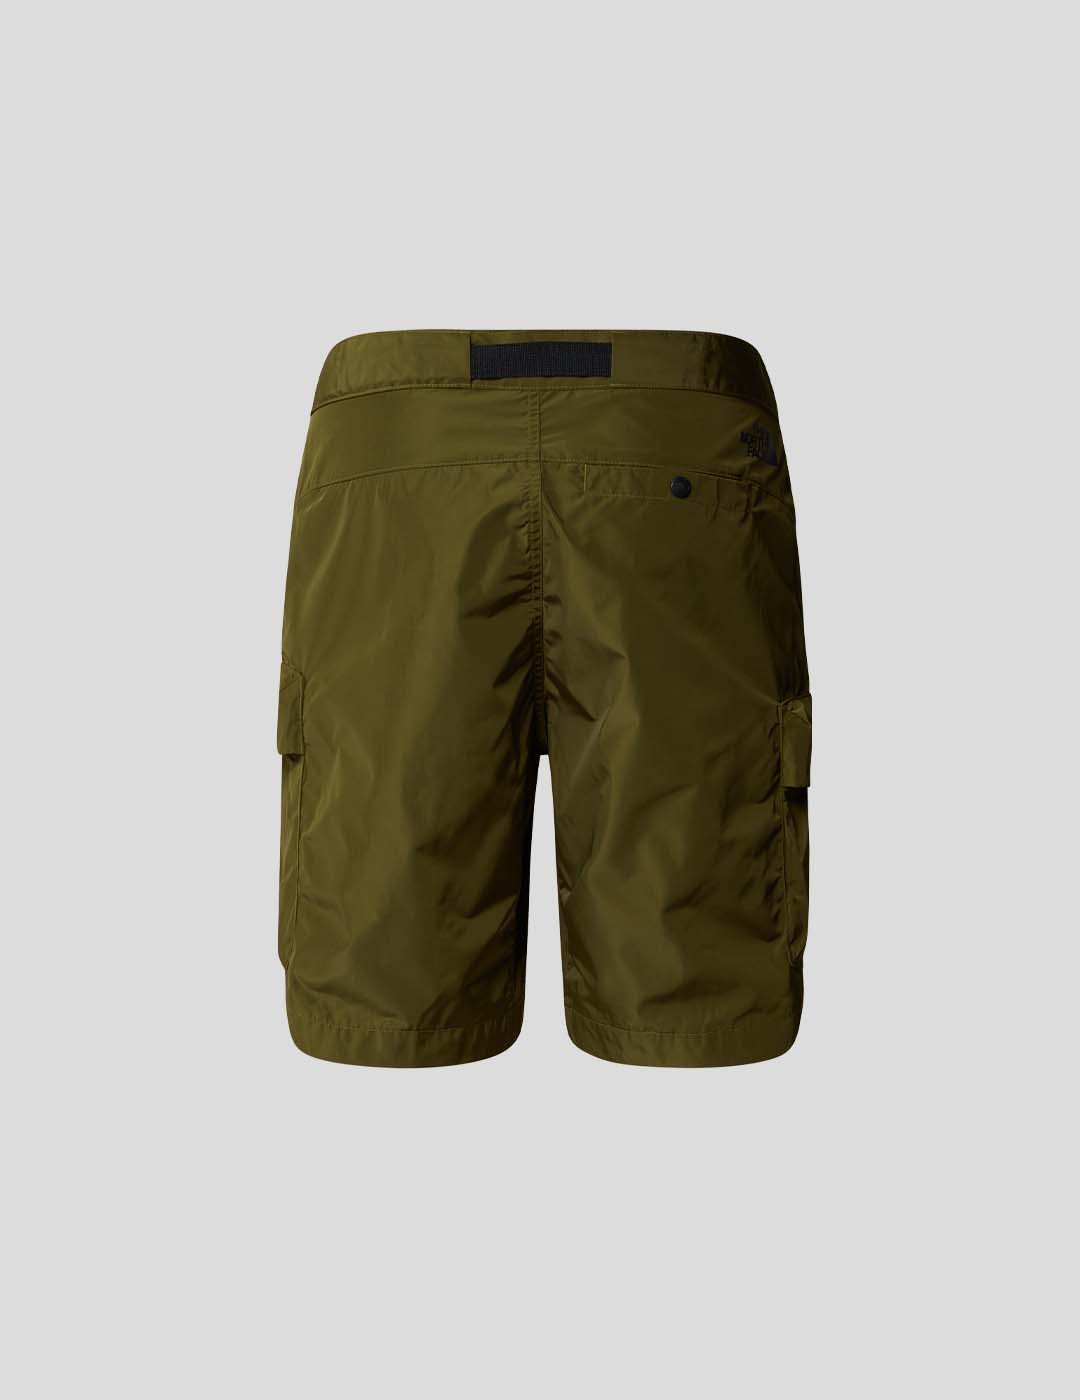 SHORTS THE NORTH FACE NSE CARGO POCKET SHORT  FOREST OLIVE